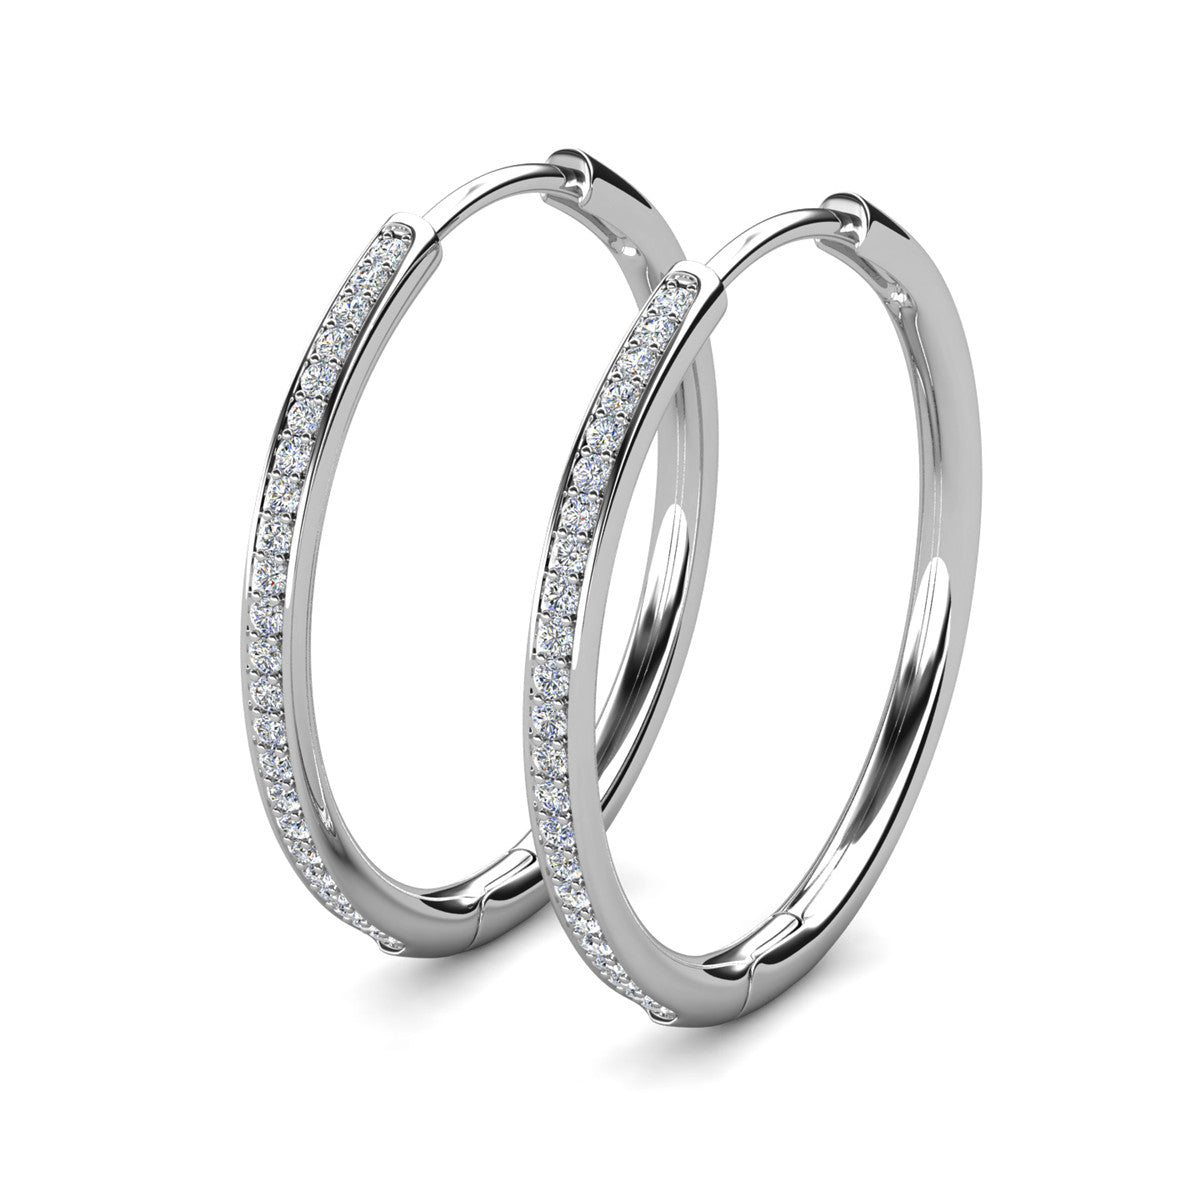 Moissanite by Cate & Chloe Delaney Sterling Silver Hoop Earrings with Moissanite and 5A Cubic Zirconia Crystals